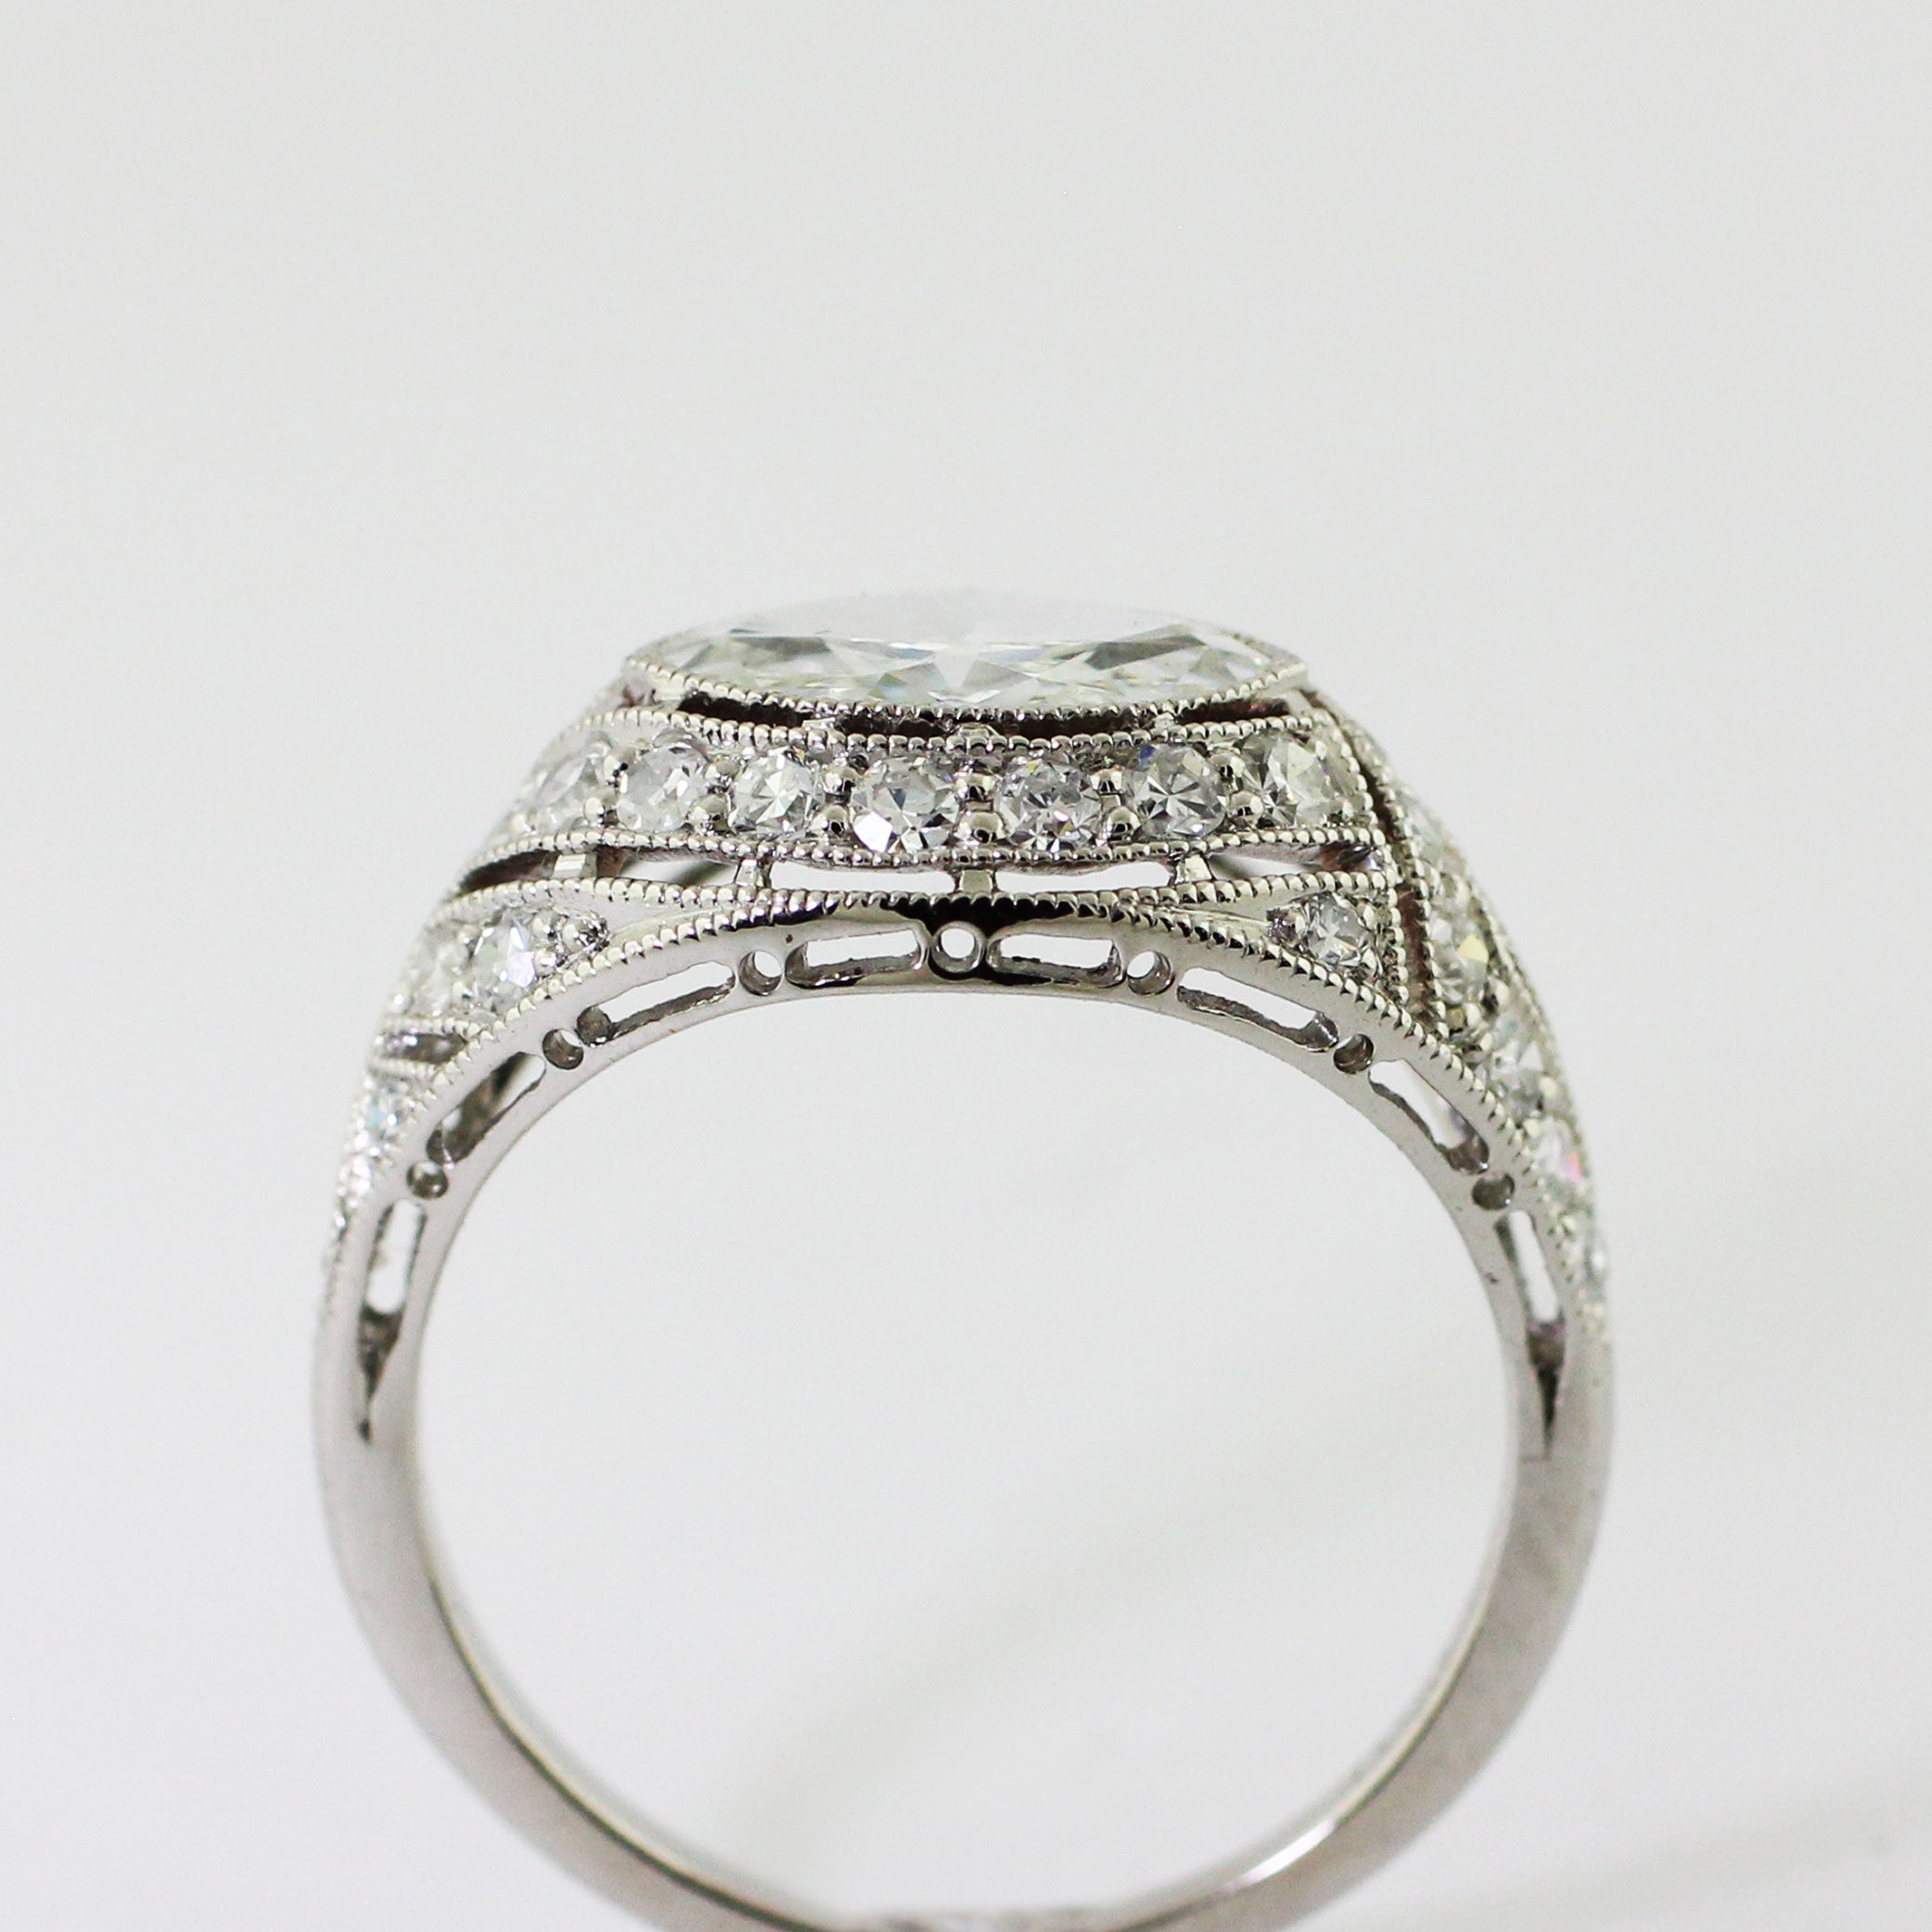 Custom platinum Art Deco ring featuring a marquise center diamond set in an illusion setting with milgrain detailing and bead-set accent diamonds.